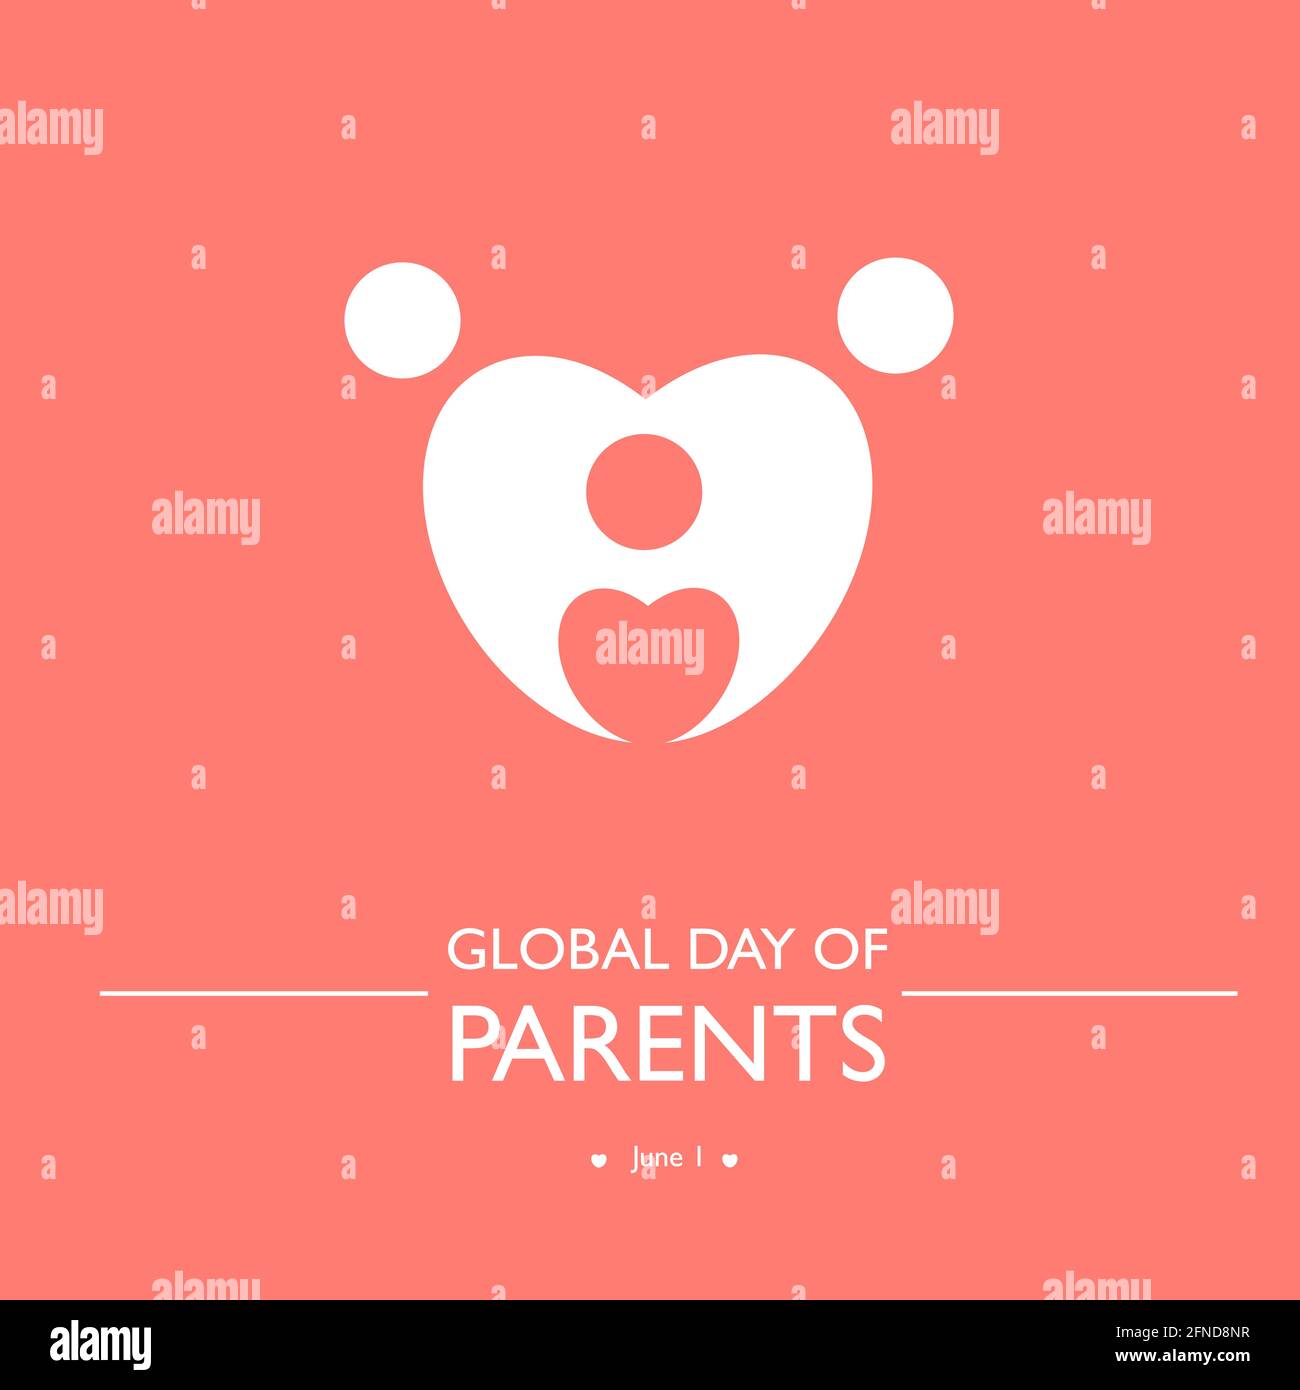 Global day of parents illustration 1st June Stock Vector